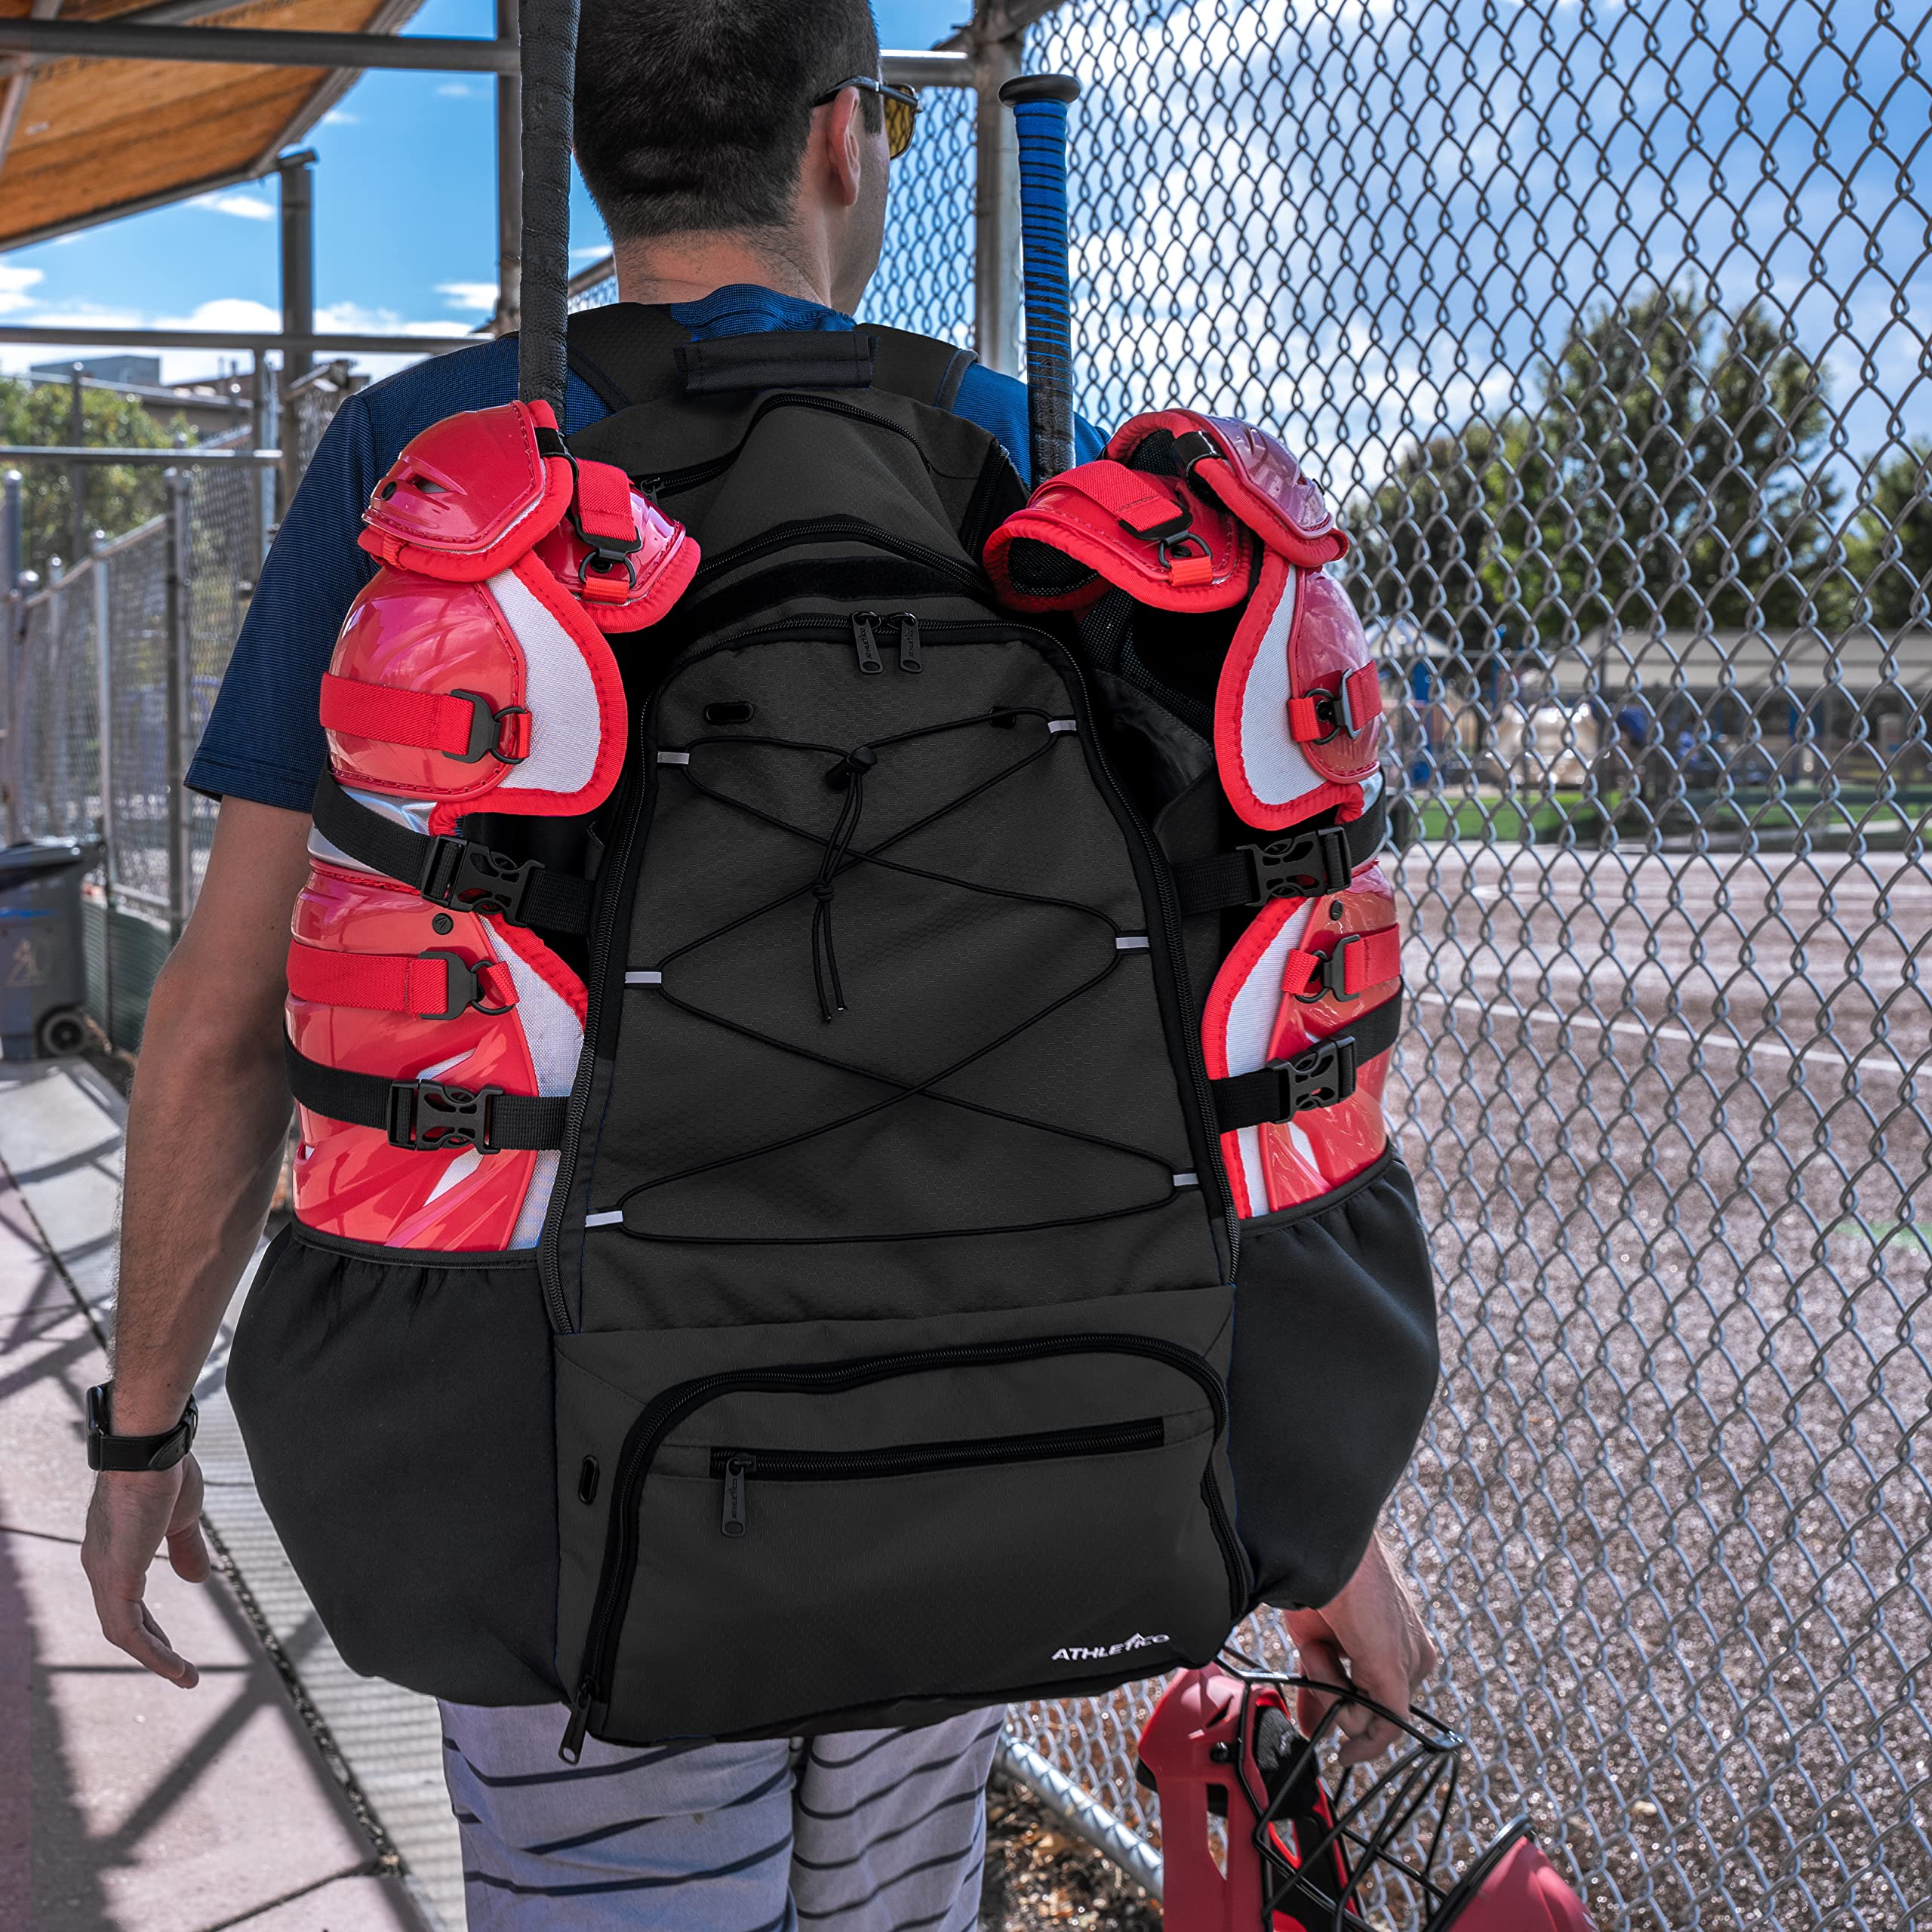 Athletico Dominator Baseball Bag - Softball Bat Bag with Shoes Compartment for Youth, Boys and Adult, Lightweight Baseball Bag with Fence Hook Hold TBall Bat, Batting Mitten, Helmet, Caps, Teeball Gear  - Good